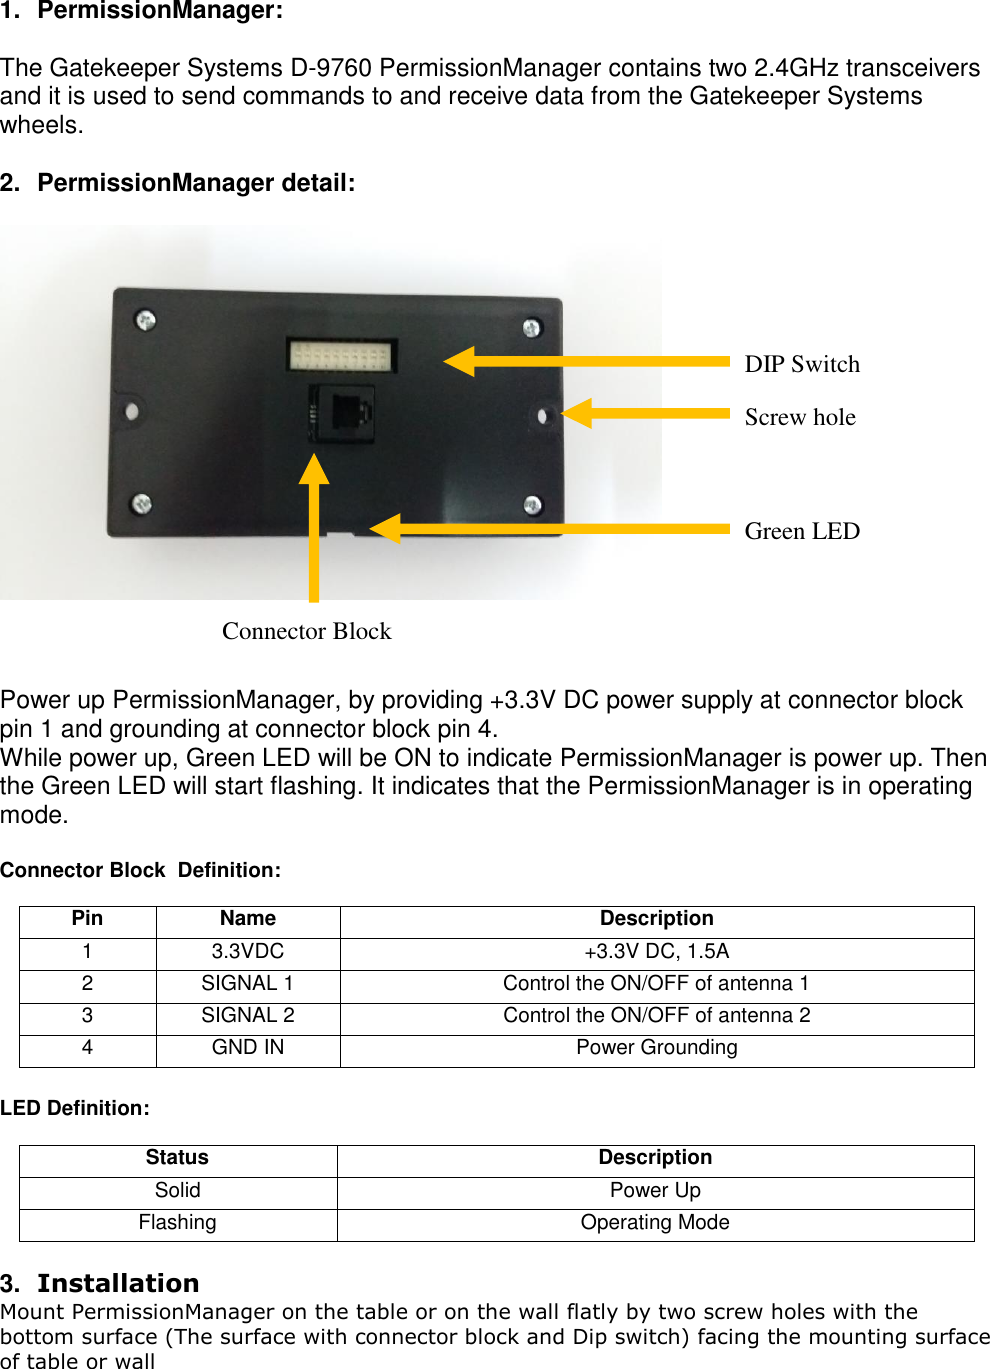 1.  PermissionManager:   The Gatekeeper Systems D-9760 PermissionManager contains two 2.4GHz transceivers and it is used to send commands to and receive data from the Gatekeeper Systems wheels.   2.  PermissionManager detail:             Power up PermissionManager, by providing +3.3V DC power supply at connector block  pin 1 and grounding at connector block pin 4. While power up, Green LED will be ON to indicate PermissionManager is power up. Then the Green LED will start flashing. It indicates that the PermissionManager is in operating mode.  Connector Block  Definition:  Pin Name Description 1 3.3VDC +3.3V DC, 1.5A 2 SIGNAL 1 Control the ON/OFF of antenna 1 3 SIGNAL 2 Control the ON/OFF of antenna 2  4 GND IN Power Grounding   LED Definition:  Status Description Solid  Power Up  Flashing Operating Mode   3. Installation Mount PermissionManager on the table or on the wall flatly by two screw holes with the bottom surface (The surface with connector block and Dip switch) facing the mounting surface of table or wall   Screw hole Connector Block Green LED  DIP Switch 